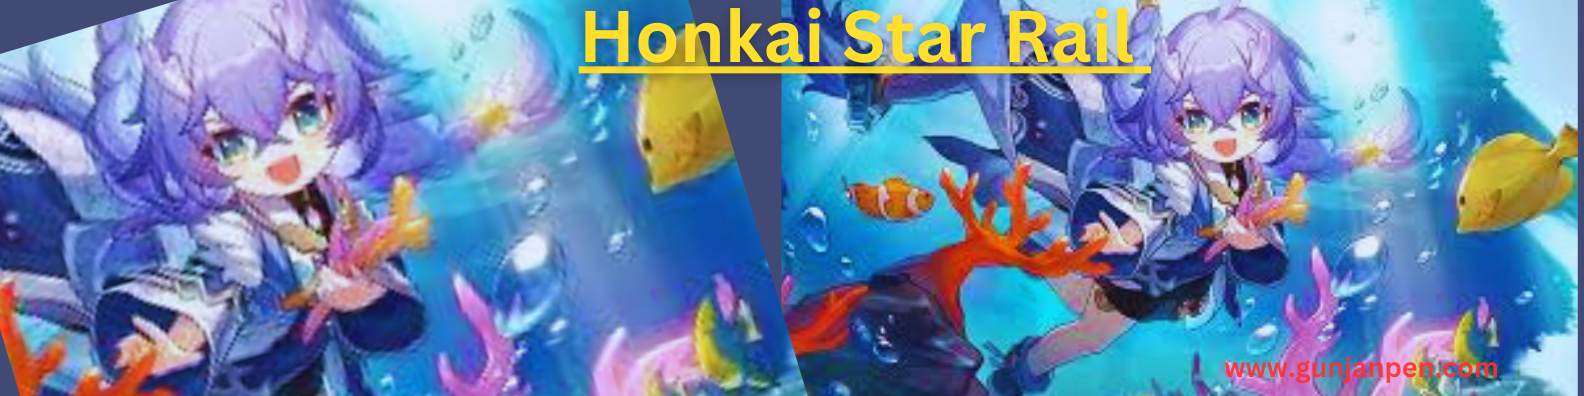 Honkai Star Rail Mastery: A Comprehensive Guide to Quests, Builds, and Tier Lists